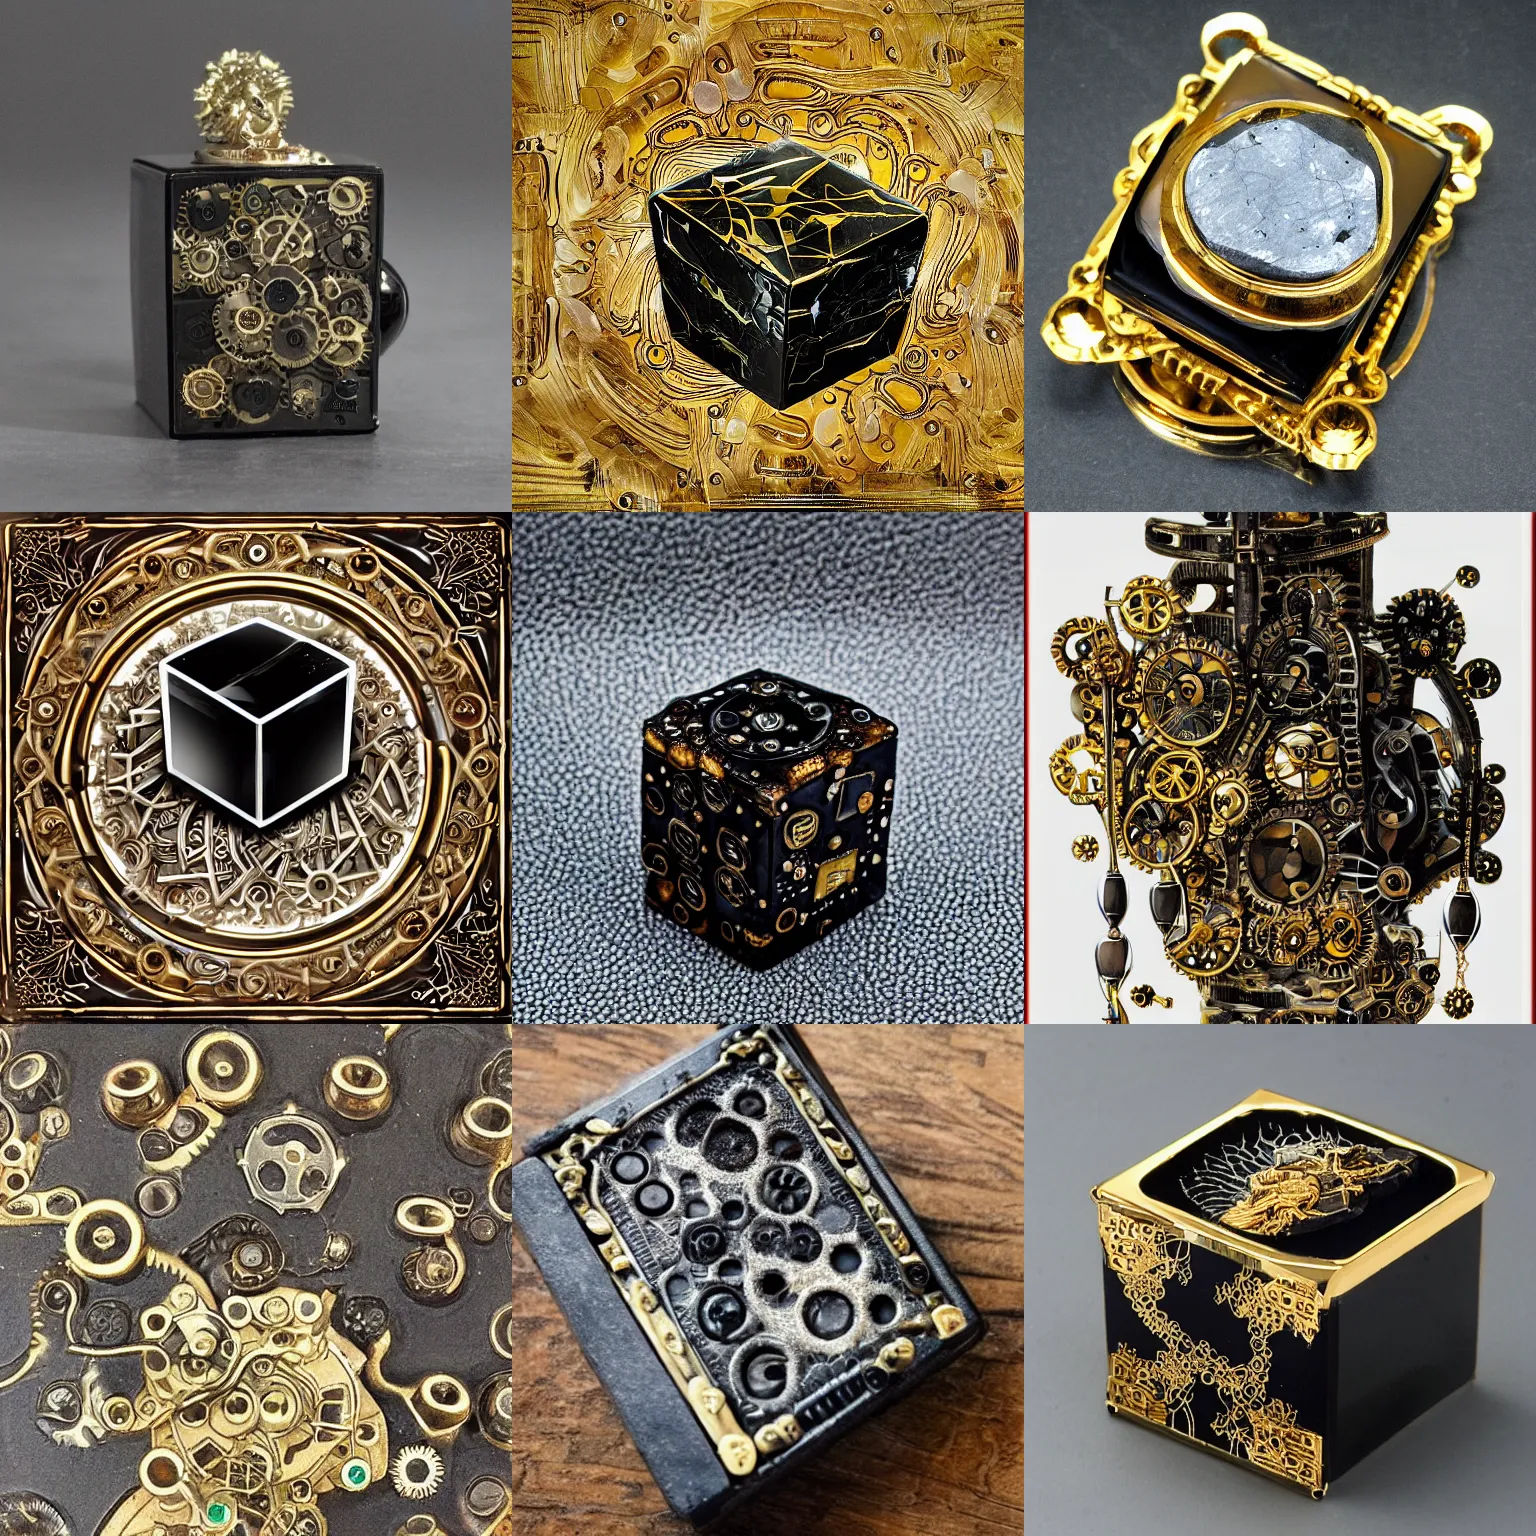 Prompt: a small black cube, made of polished onyx stone. it has golden metal mechanisms, springs, cogs, gears, and glowing veins of energy on its surface. it has elaborate shiny jewels embedded in it. inked in a fantasy style.